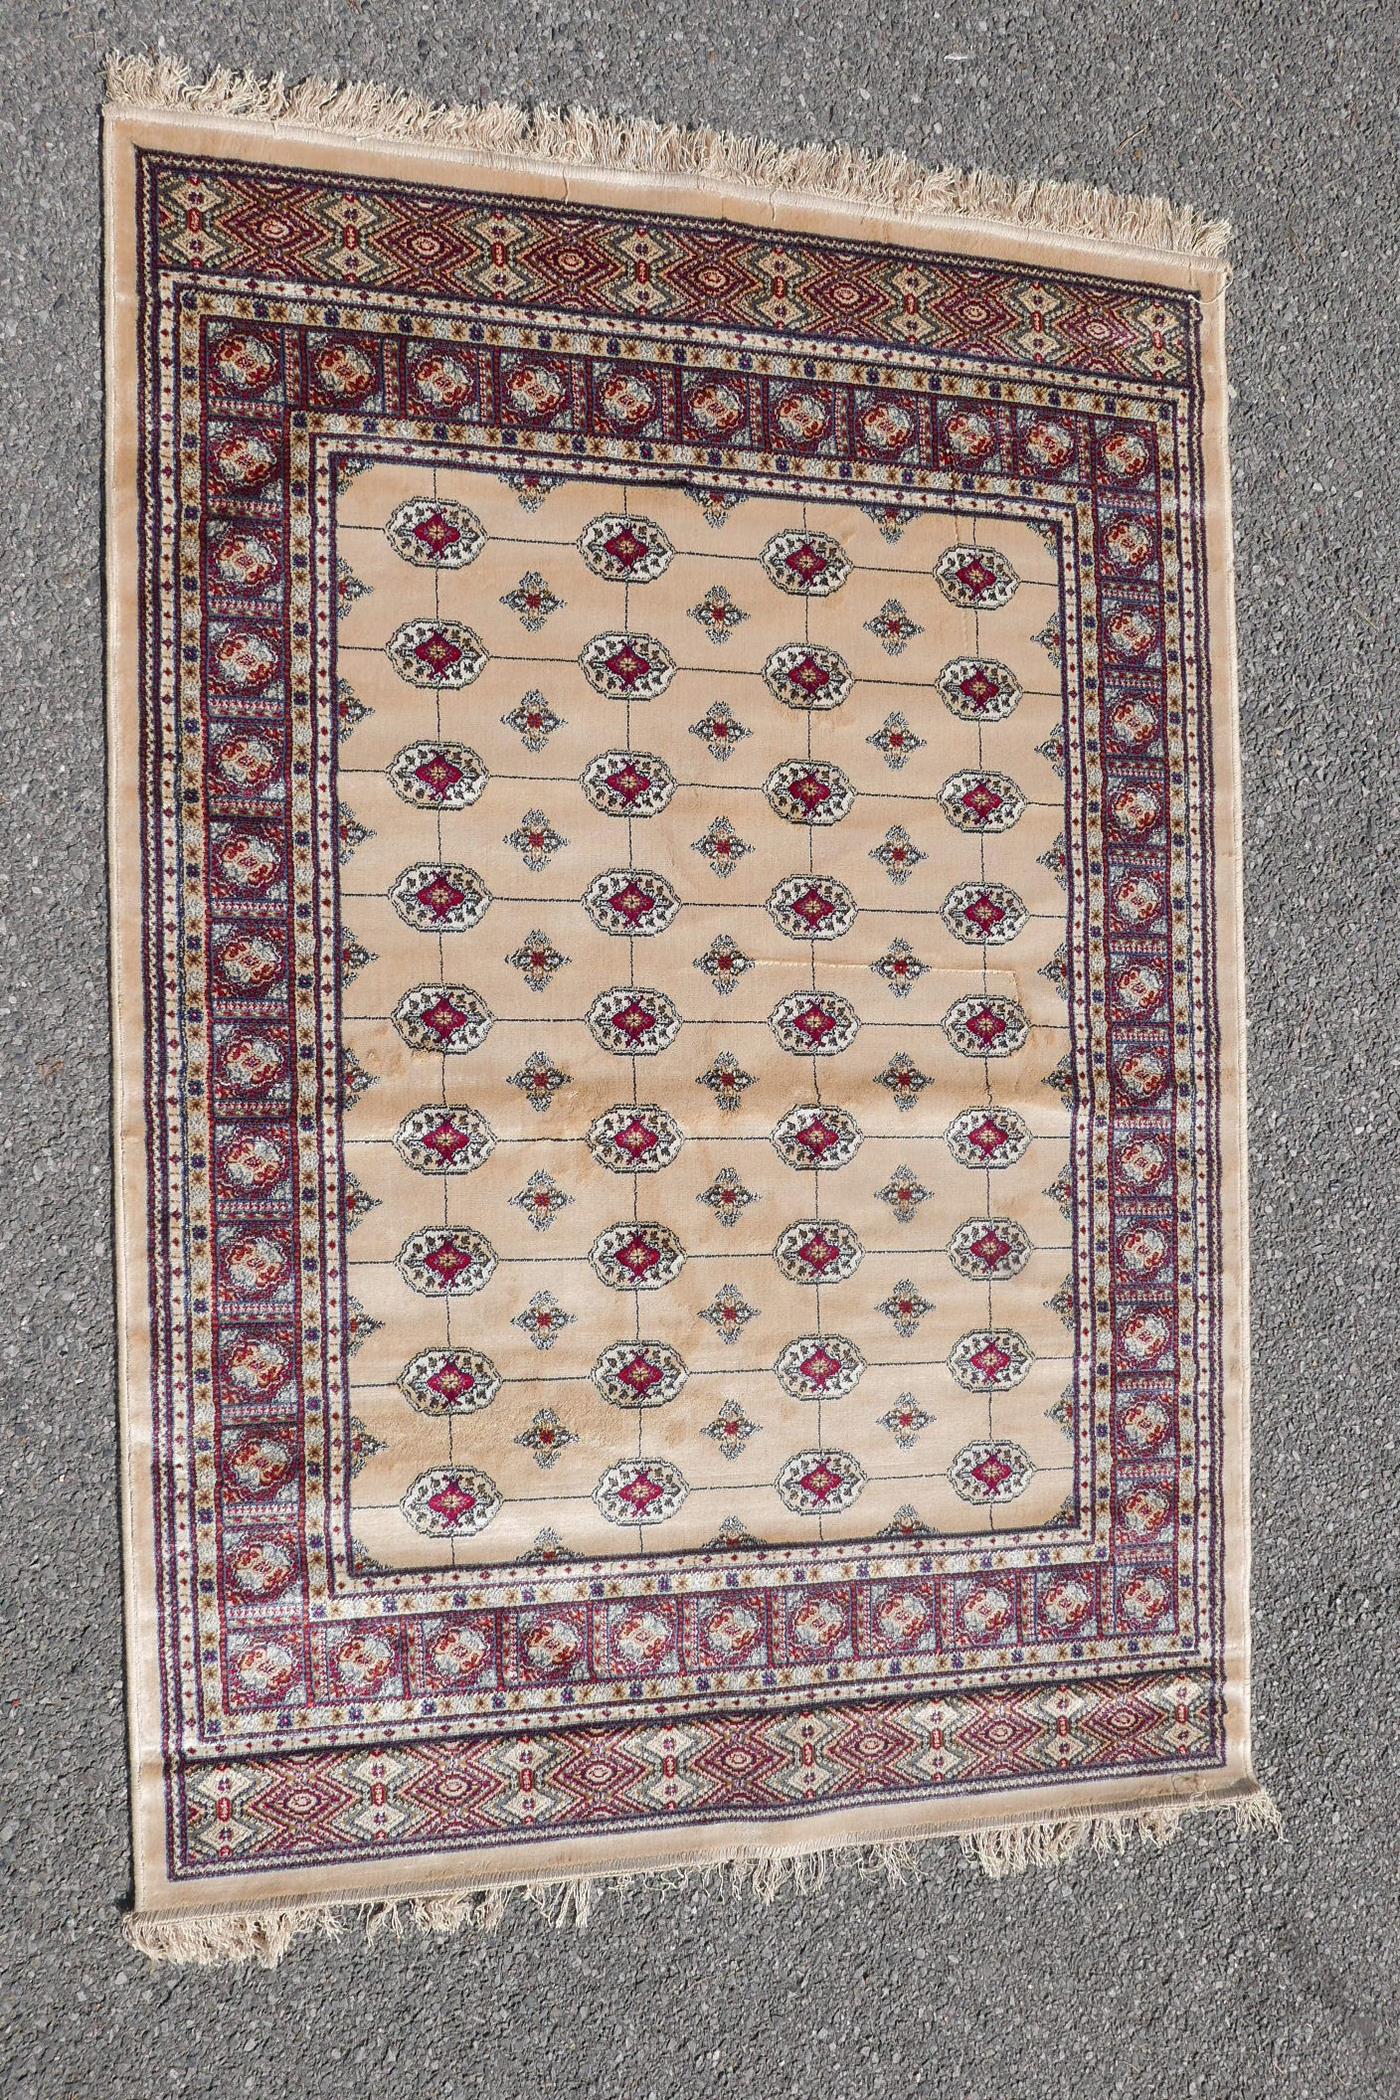 A gold ground Kashmiri rug with a Bokhara design, 46" x 66" - Image 2 of 4